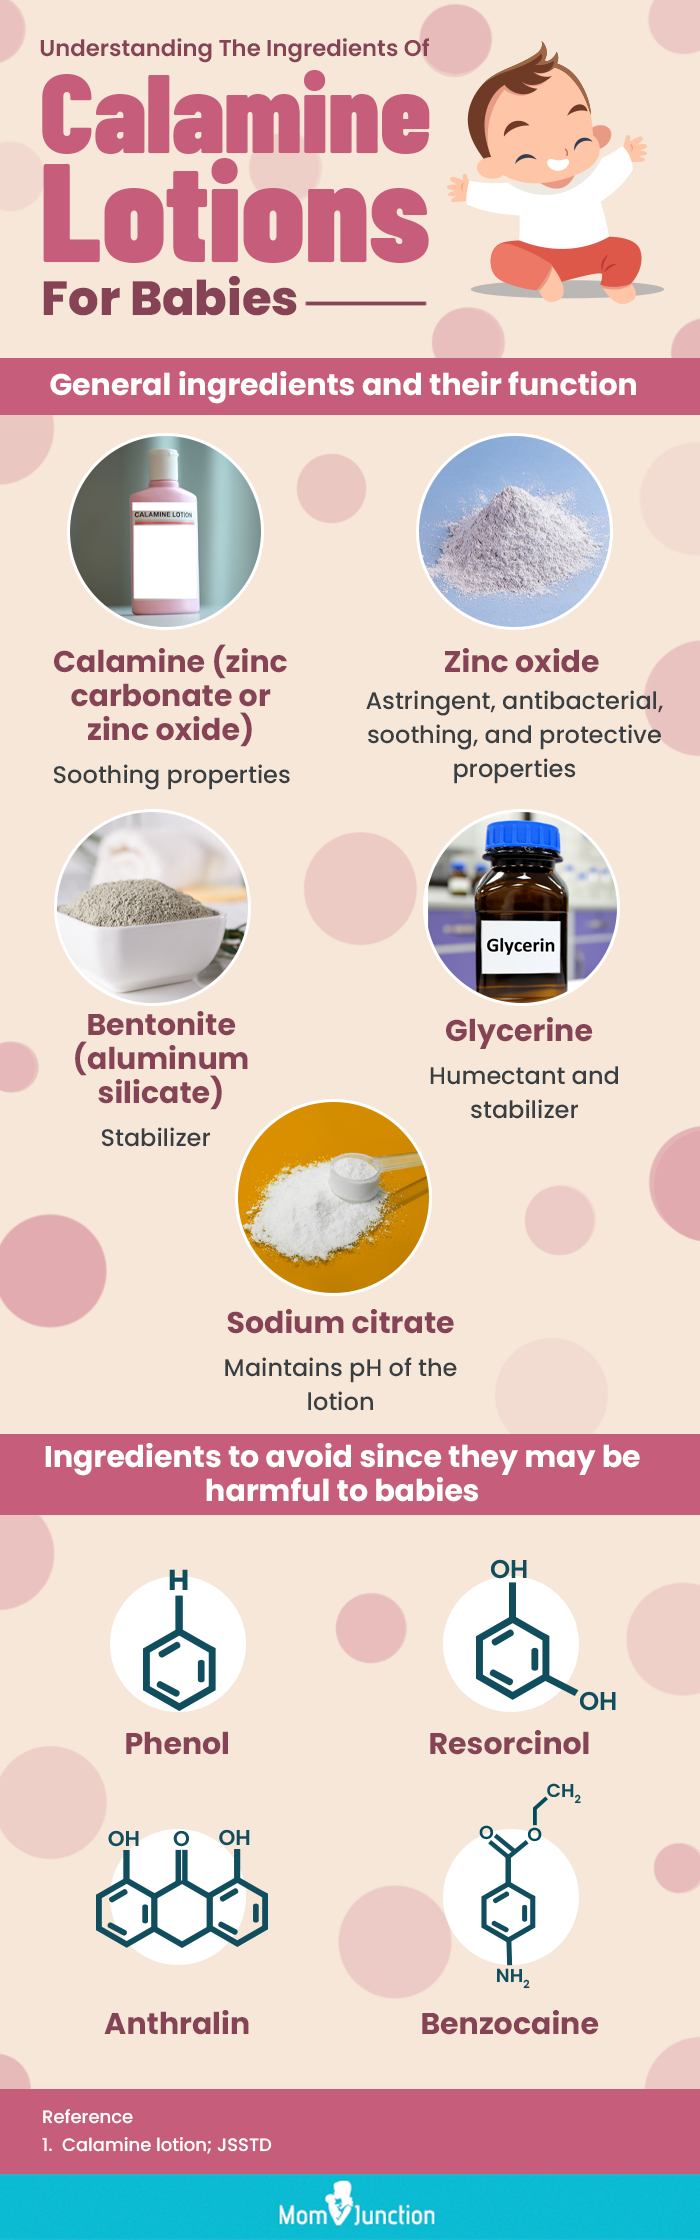 understanding the ingredients of calamine lotions for babies (infographic)